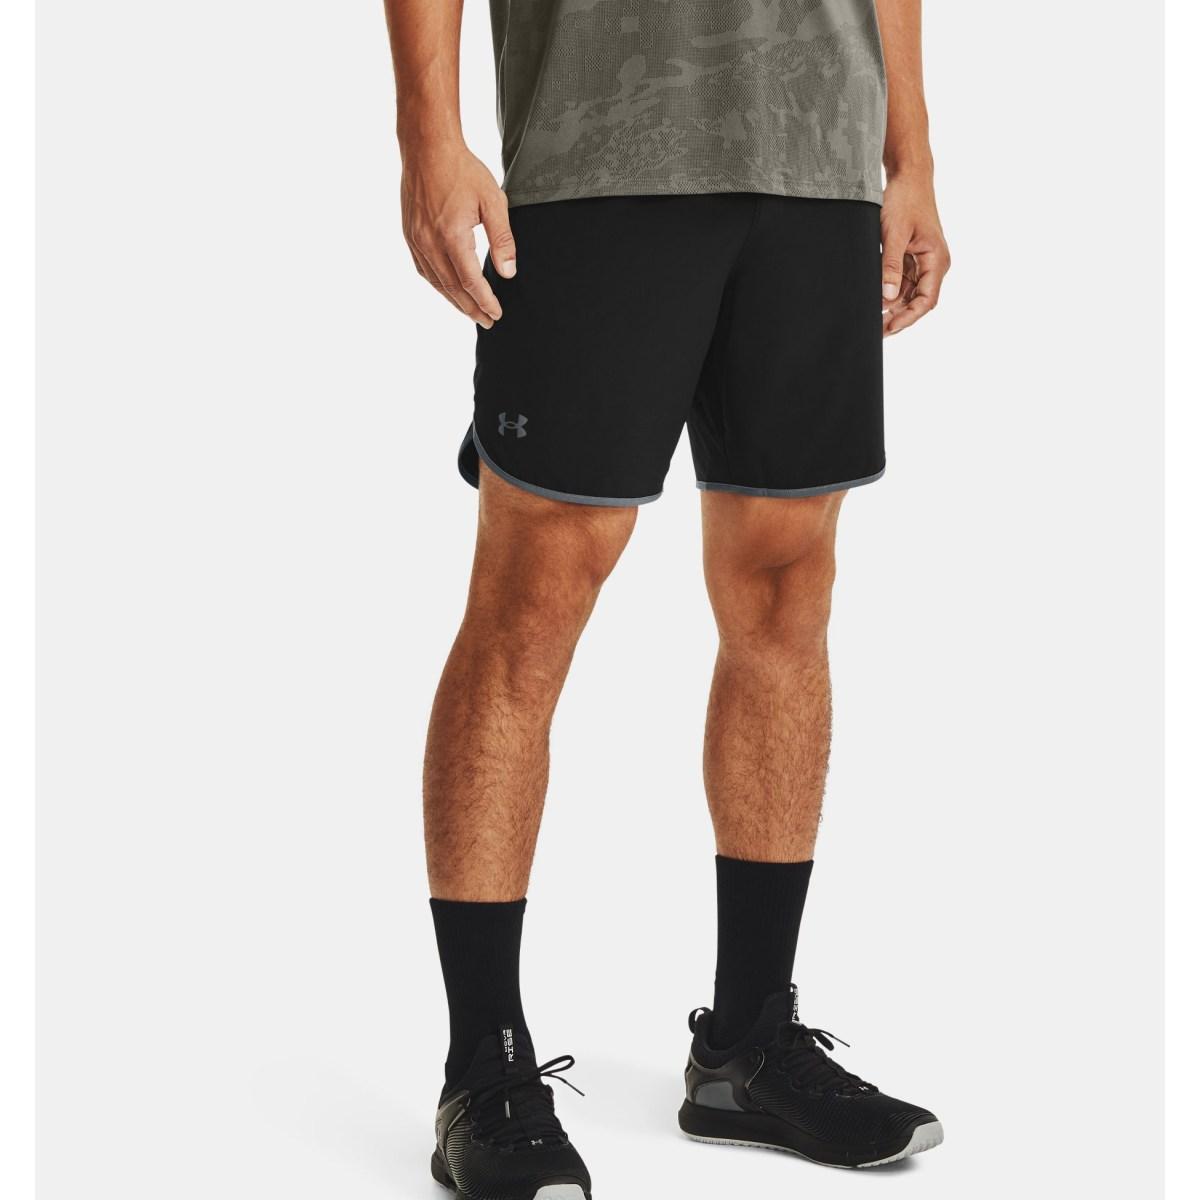 Shorts HIIT woven UNDER ARMOUR